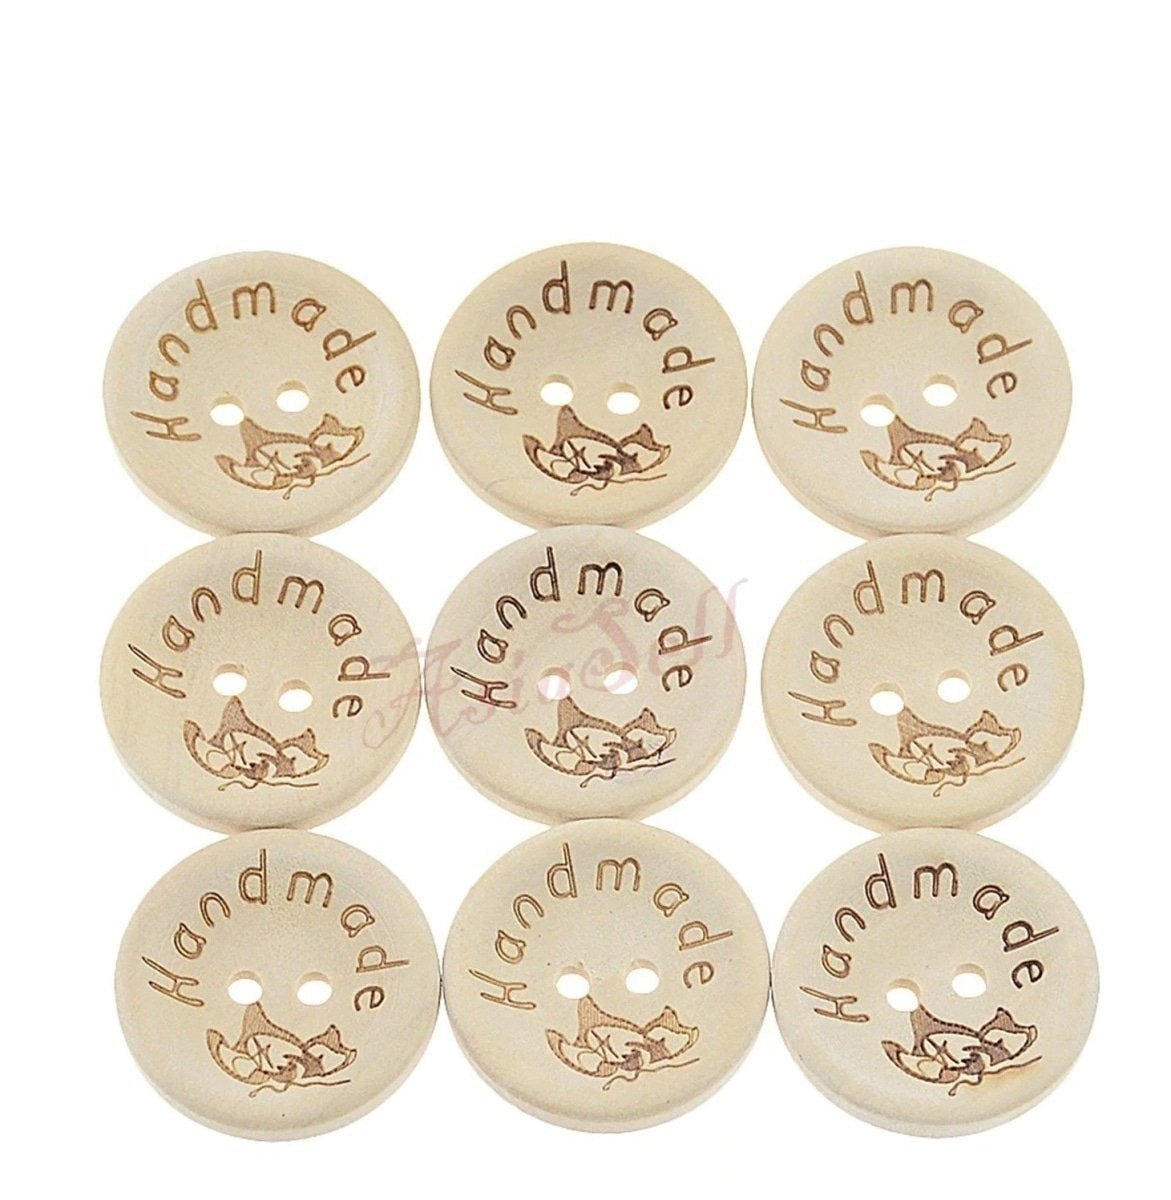 100pcs 2-Holes Handmade with Love Round Wooden Buttons Button Handmade Clothes - 20mm Butterfly Design - - Asia Sell